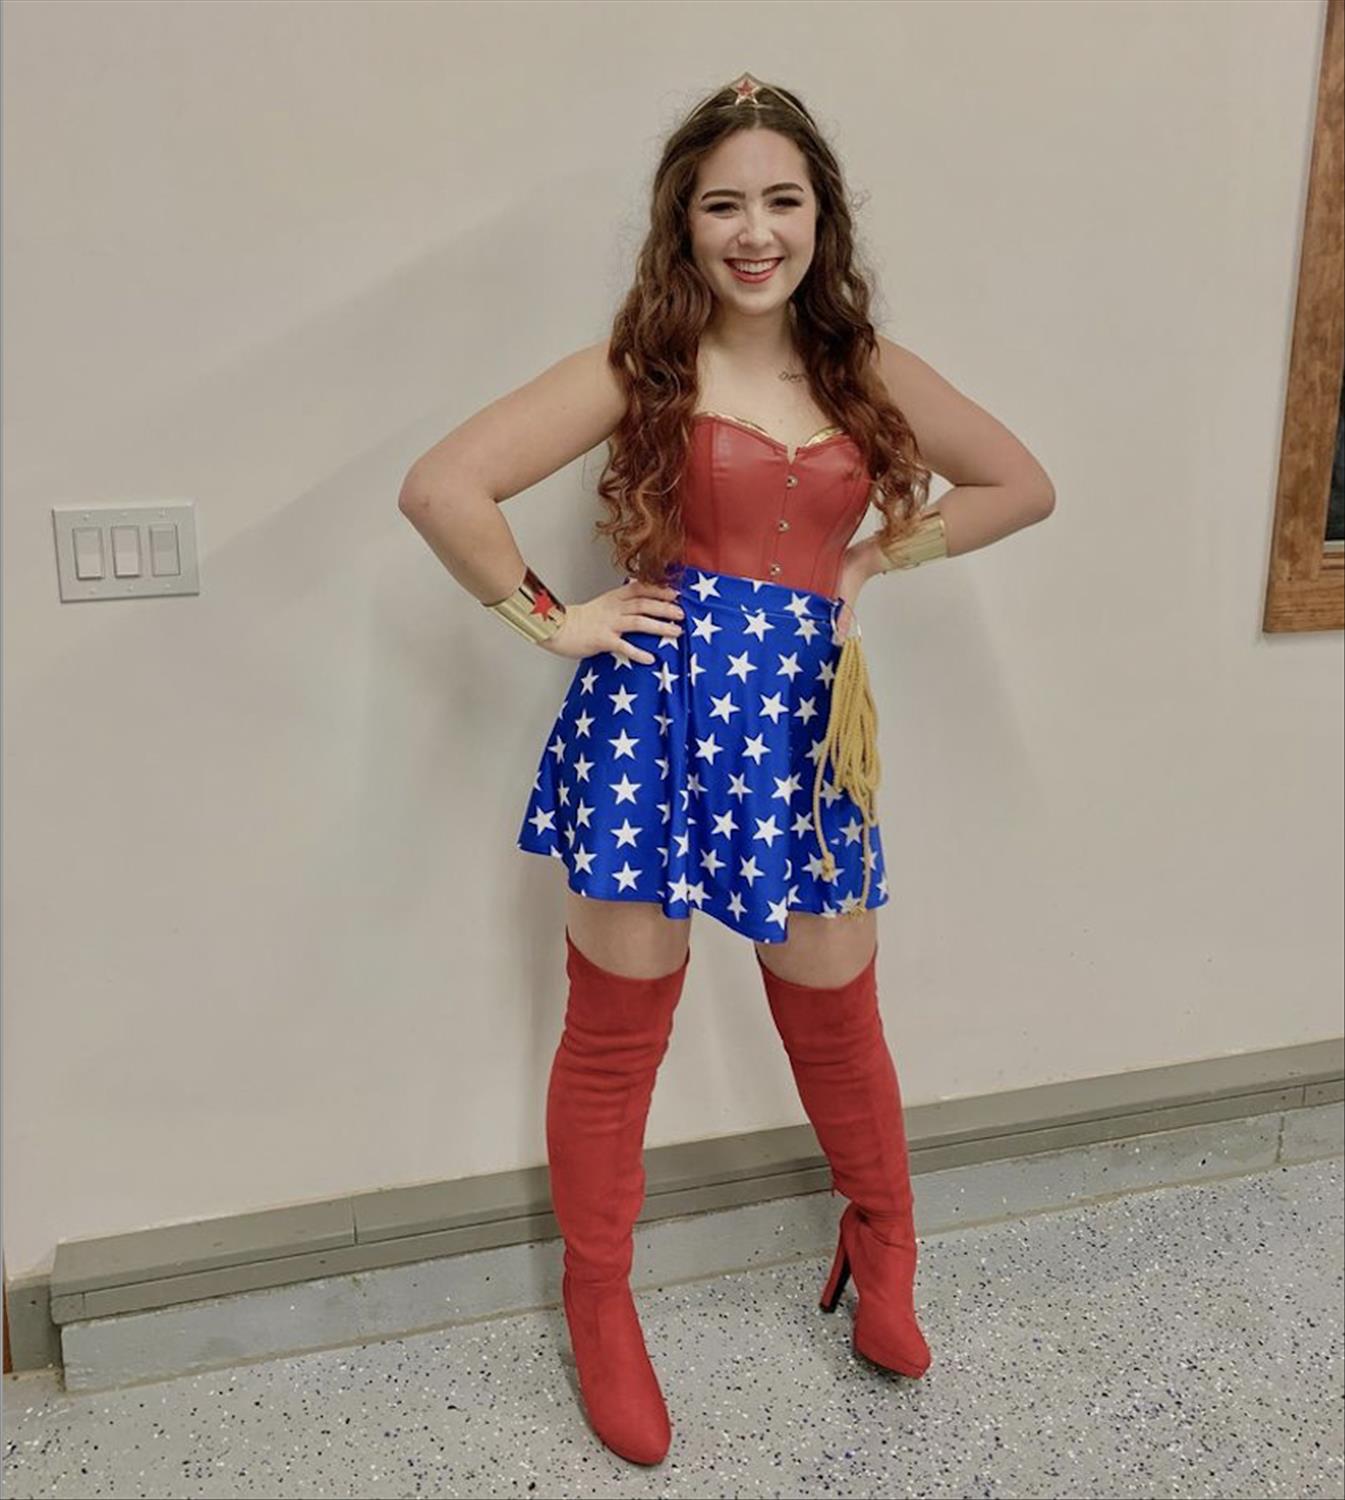 Cool Solo Halloween Costume Ideas for College Girls